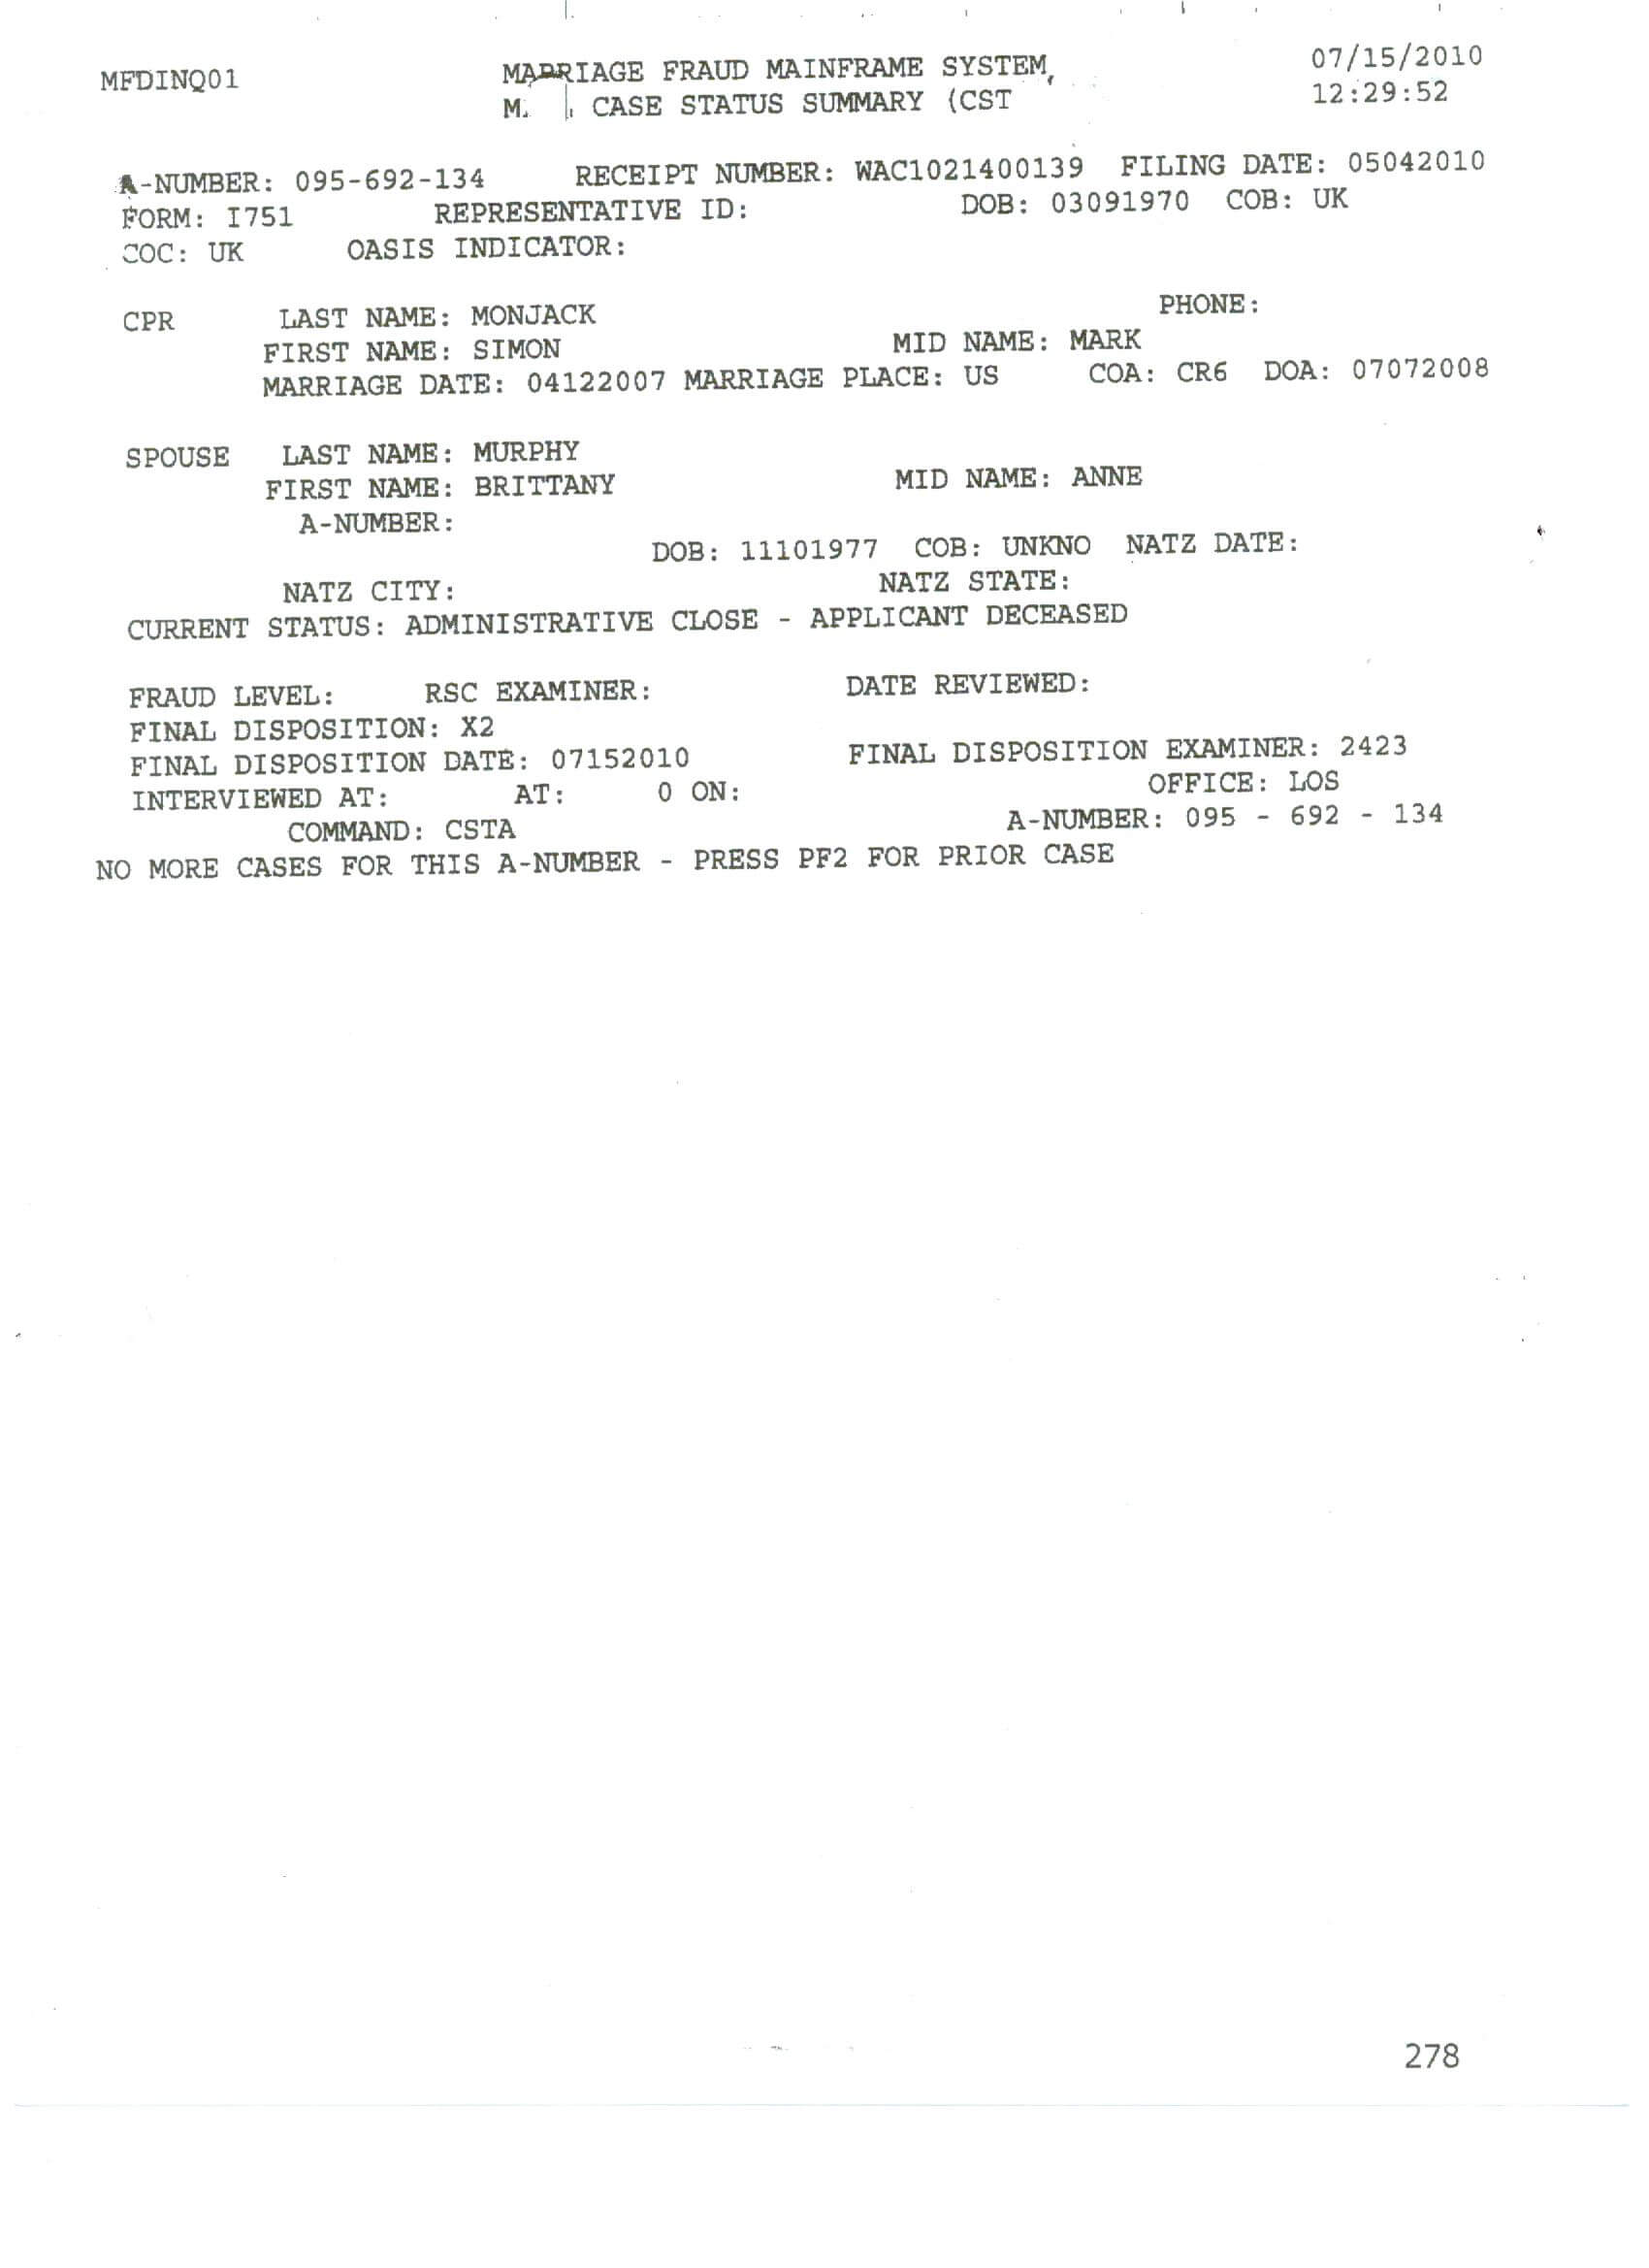 DHS MARRIAGE FRAUD AGAINST BRITTANY MURPHY AND SIMON MONJACK-PAGE1